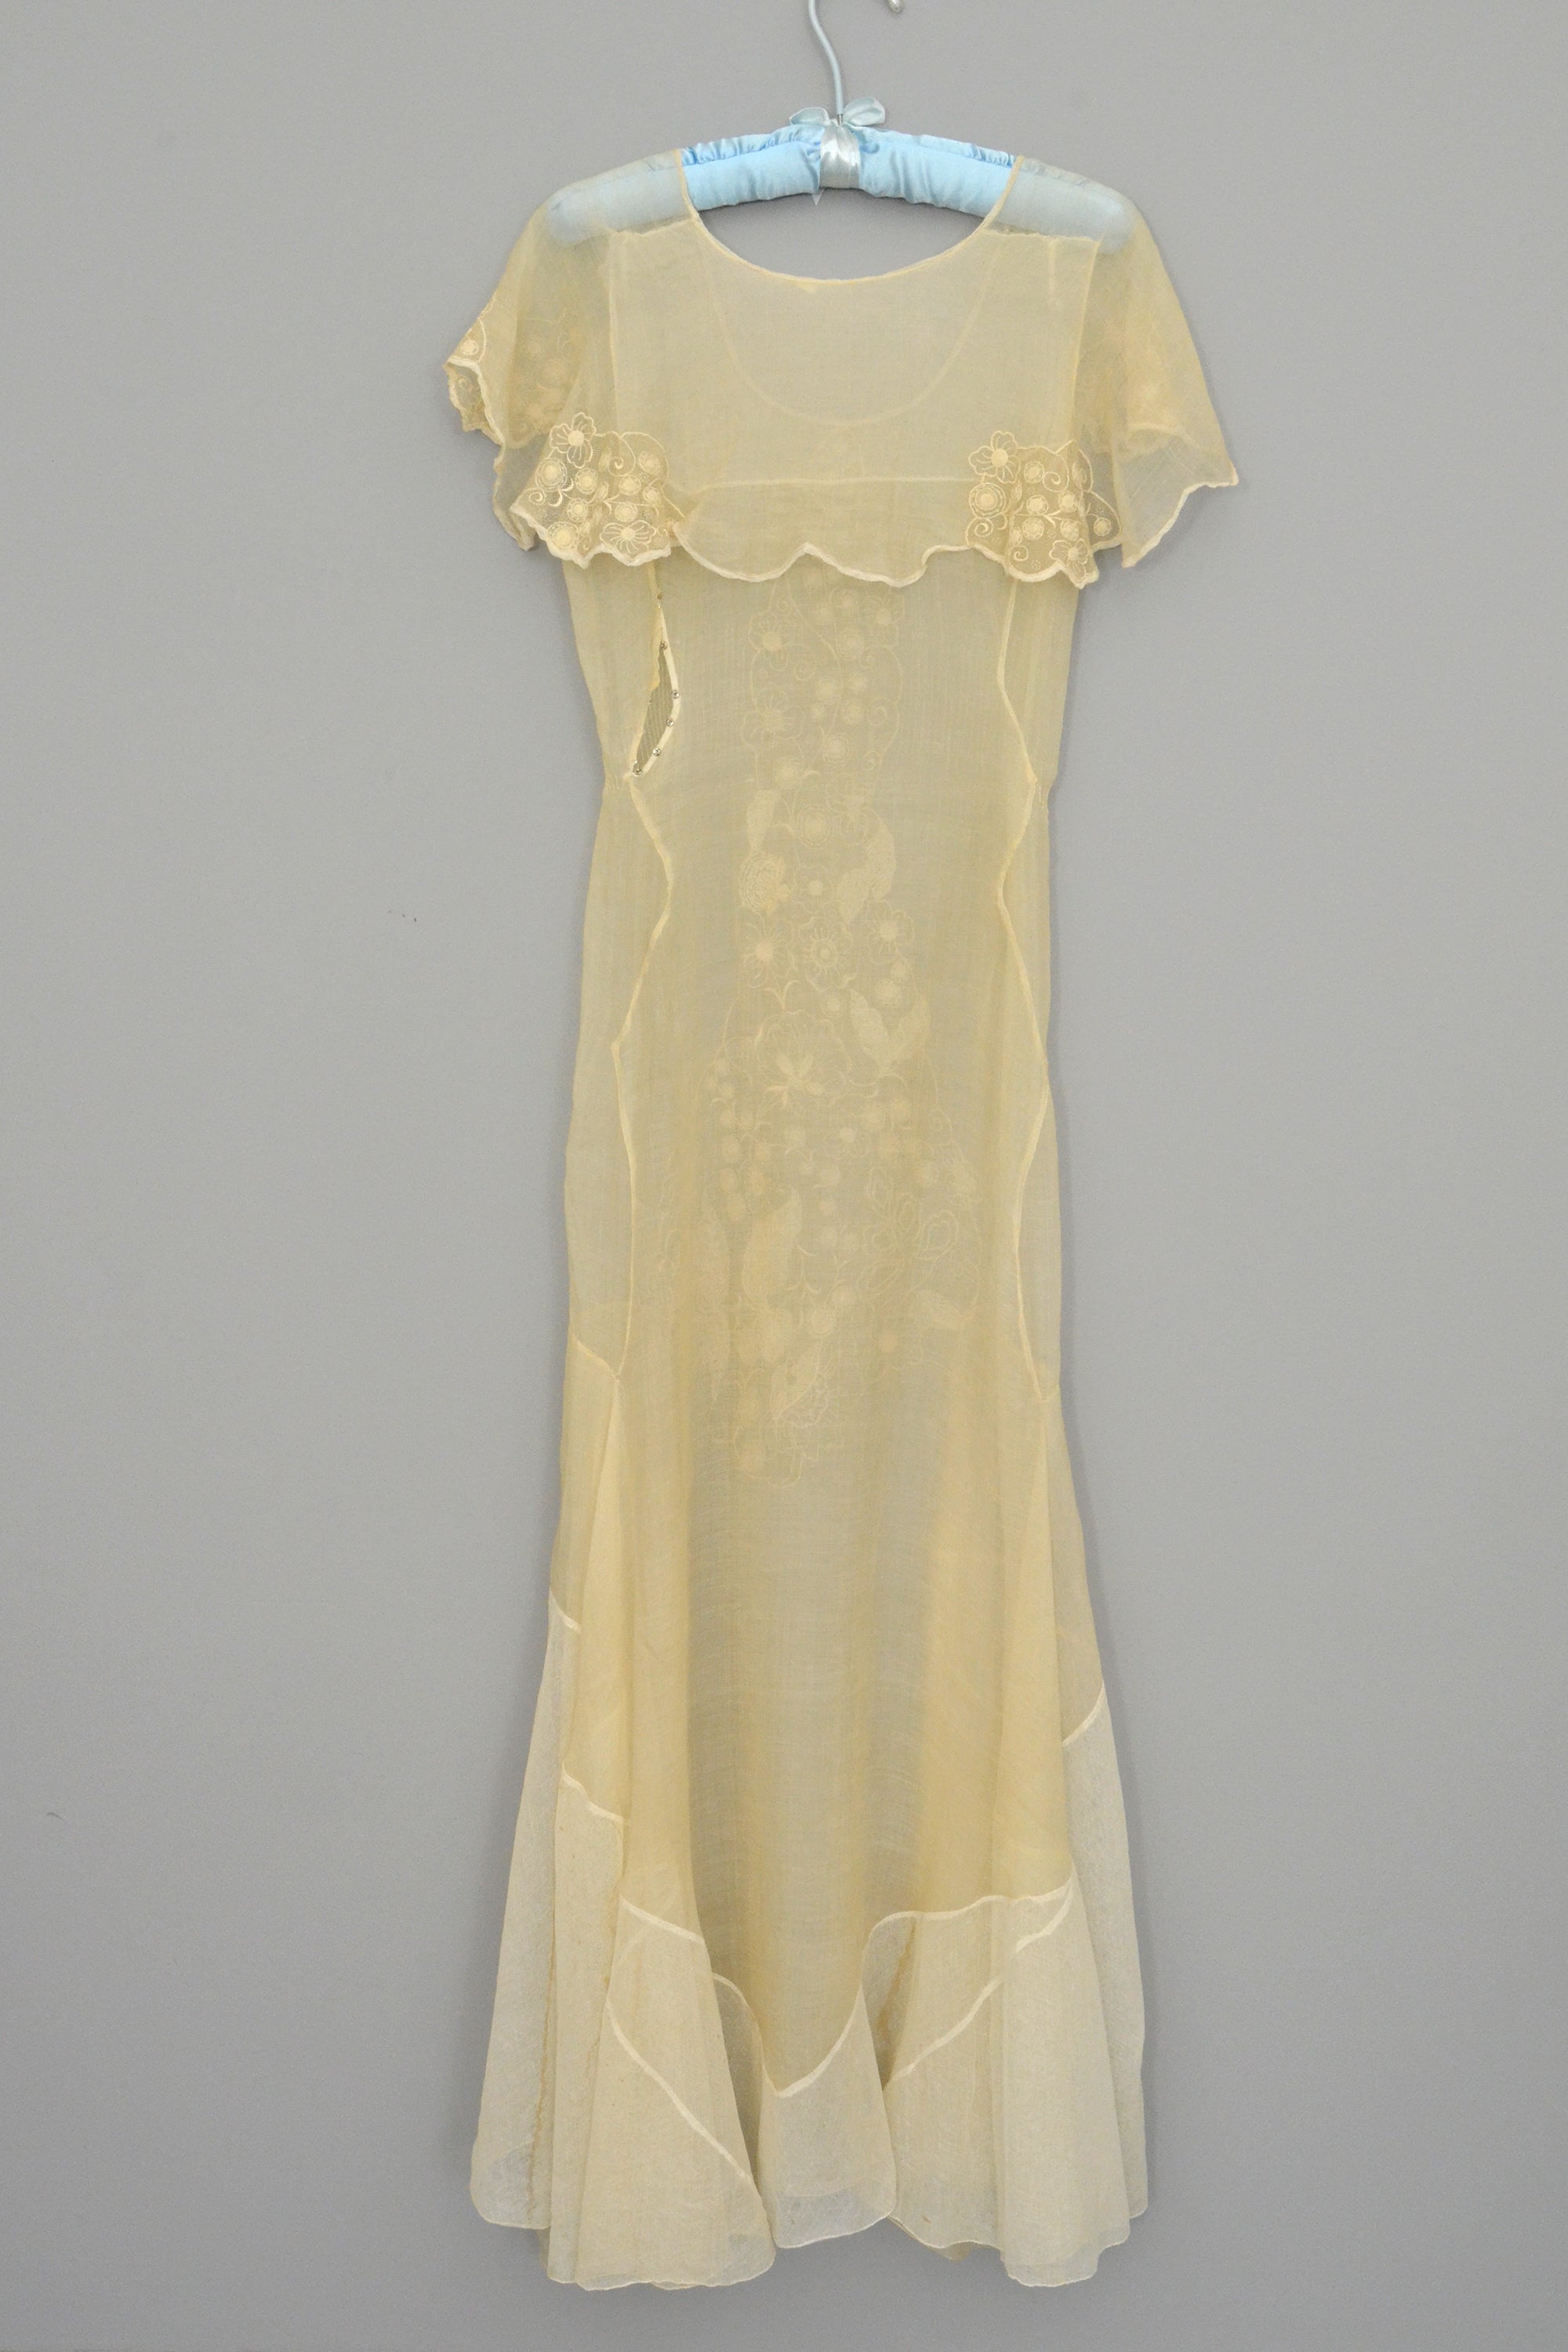 1920s 30s Deco Flapper Dress Gown | Sheer Gauzy Embroidered Organza ...